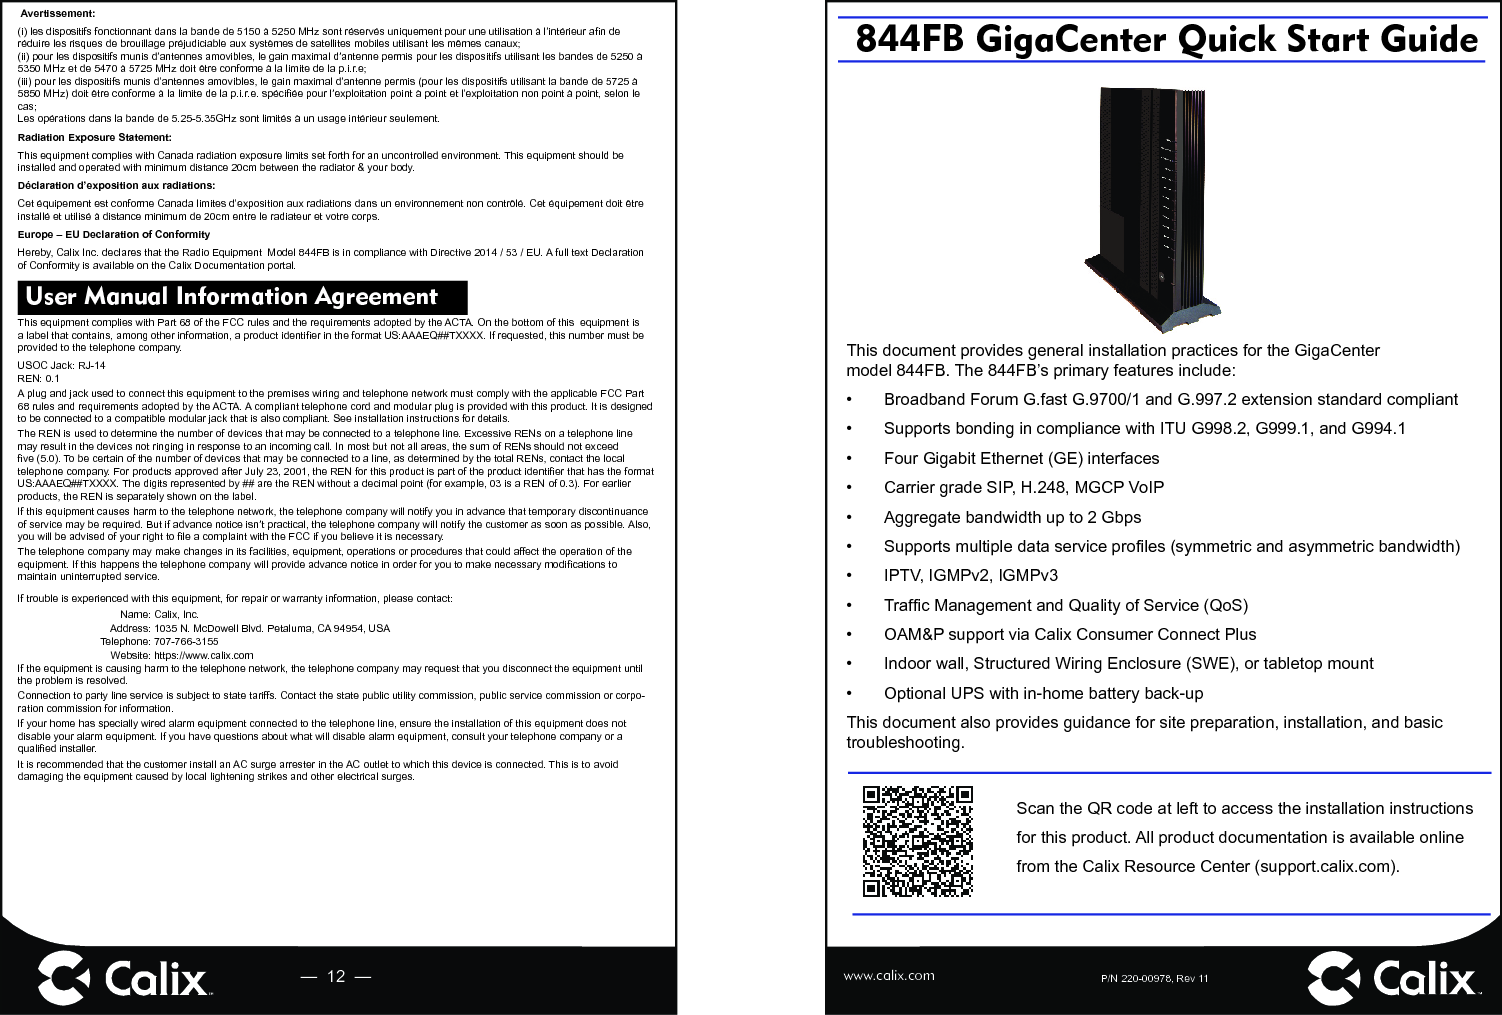 P/N 220-00978, Rev 11     844FB GigaCenter Quick Start Guide—  12  — www.calix.comScan the QR code at left to access the installation instructions for this product. All product documentation is available online from the Calix Resource Center (support.calix.com).This document provides general installation practices for the GigaCenter model 844FB. The 844FB’s primary features include:•  Broadband Forum G.fast G.9700/1 and G.997.2 extension standard compliant•  Supports bonding in compliance with ITU G998.2, G999.1, and G994.1 •  Four Gigabit Ethernet (GE) interfaces•  Carrier grade SIP, H.248, MGCP VoIP•  Aggregate bandwidth up to 2 Gbps•  Supports multiple data service proﬁ les (symmetric and asymmetric bandwidth)•  IPTV, IGMPv2, IGMPv3 • Trafﬁ c Management and Quality of Service (QoS)•  OAM&amp;P support via Calix Consumer Connect Plus•  Indoor wall, Structured Wiring Enclosure (SWE), or tabletop mount•  Optional UPS with in-home battery back-up This document also provides guidance for site preparation, installation, and basic troubleshooting. User Manual Information Agreement This equipment complies with Part 68 of the FCC rules and the requirements adopted by the ACTA. On the bottom of this  equipment is a label that contains, among other information, a product identiﬁ er in the format US:AAAEQ##TXXXX. If requested, this number must be provided to the telephone company.USOC Jack: RJ-14REN: 0.1A plug and jack used to connect this equipment to the premises wiring and telephone network must comply with the applicable FCC Part 68 rules and requirements adopted by the ACTA. A compliant telephone cord and modular plug is provided with this product. It is designed to be connected to a compatible modular jack that is also compliant. See installation instructions for details.The REN is used to determine the number of devices that may be connected to a telephone line. Excessive RENs on a telephone line may result in the devices not ringing in response to an incoming call. In most but not all areas, the sum of RENs should not exceed ﬁ ve (5.0). To be certain of the number of devices that may be connected to a line, as determined by the total RENs, contact the local telephone company. For products approved after July 23, 2001, the REN for this product is part of the product identiﬁ er that has the format US:AAAEQ##TXXXX. The digits represented by ## are the REN without a decimal point (for example, 03 is a REN of 0.3). For earlier products, the REN is separately shown on the label.If this equipment causes harm to the telephone network, the telephone company will notify you in advance that temporary discontinuance of service may be required. But if advance notice isn’t practical, the telephone company will notify the customer as soon as possible. Also, you will be advised of your right to ﬁ le a complaint with the FCC if you believe it is necessary.The telephone company may make changes in its facilities, equipment, operations or procedures that could affect the operation of the equipment. If this happens the telephone company will provide advance notice in order for you to make necessary modiﬁ cations to maintain uninterrupted service.If trouble is experienced with this equipment, for repair or warranty information, please contact:Name: Calix, Inc.Address: 1035 N. McDowell Blvd. Petaluma, CA 94954, USATelephone: 707-766-3155Website: https://www.calix.comIf the equipment is causing harm to the telephone network, the telephone company may request that you disconnect the equipment until the problem is resolved.Connection to party line service is subject to state tariffs. Contact the state public utility commission, public service commission or corpo-ration commission for information.If your home has specially wired alarm equipment connected to the telephone line, ensure the installation of this equipment does not disable your alarm equipment. If you have questions about what will disable alarm equipment, consult your telephone company or a qualiﬁ ed installer.It is recommended that the customer install an AC surge arrester in the AC outlet to which this device is connected. This is to avoid damaging the equipment caused by local lightening strikes and other electrical surges.Avertissement:(i) les dispositifs fonctionnant dans la bande de 5150 à 5250 MHz sont réservés uniquement pour une utilisation à l’intérieur aﬁ n de réduire les risques de brouillage préjudiciable aux systèmes de satellites mobiles utilisant les mêmes canaux;(ii) pour les dispositifs munis d’antennes amovibles, le gain maximal d’antenne permis pour les dispositifs utilisant les bandes de 5250 à 5350 MHz et de 5470 à 5725 MHz doit être conforme à la limite de la p.i.r.e;(iii) pour les dispositifs munis d’antennes amovibles, le gain maximal d’antenne permis (pour les dispositifs utilisant la bande de 5725 à 5850 MHz) doit être conforme à la limite de la p.i.r.e. spéciﬁ ée pour l’exploitation point à point et l’exploitation non point à point, selon le cas;Les opérations dans la bande de 5.25-5.35GHz sont limités à un usage intérieur seulement.Radiation Exposure Statement:This equipment complies with Canada radiation exposure limits set forth for an uncontrolled environment. This equipment should be installed and operated with minimum distance 20cm between the radiator &amp; your body.Déclaration d’exposition aux radiations:Cet équipement est conforme Canada limites d’exposition aux radiations dans un environnement non contrôlé. Cet équipement doit être installé et utilisé à distance minimum de 20cm entre le radiateur et votre corps.Europe – EU Declaration of ConformityHereby, Calix Inc. declares that the Radio Equipment  Model 844FB is in compliance with Directive 2014 / 53 / EU. A full text Declaration of Conformity is available on the Calix Documentation portal.